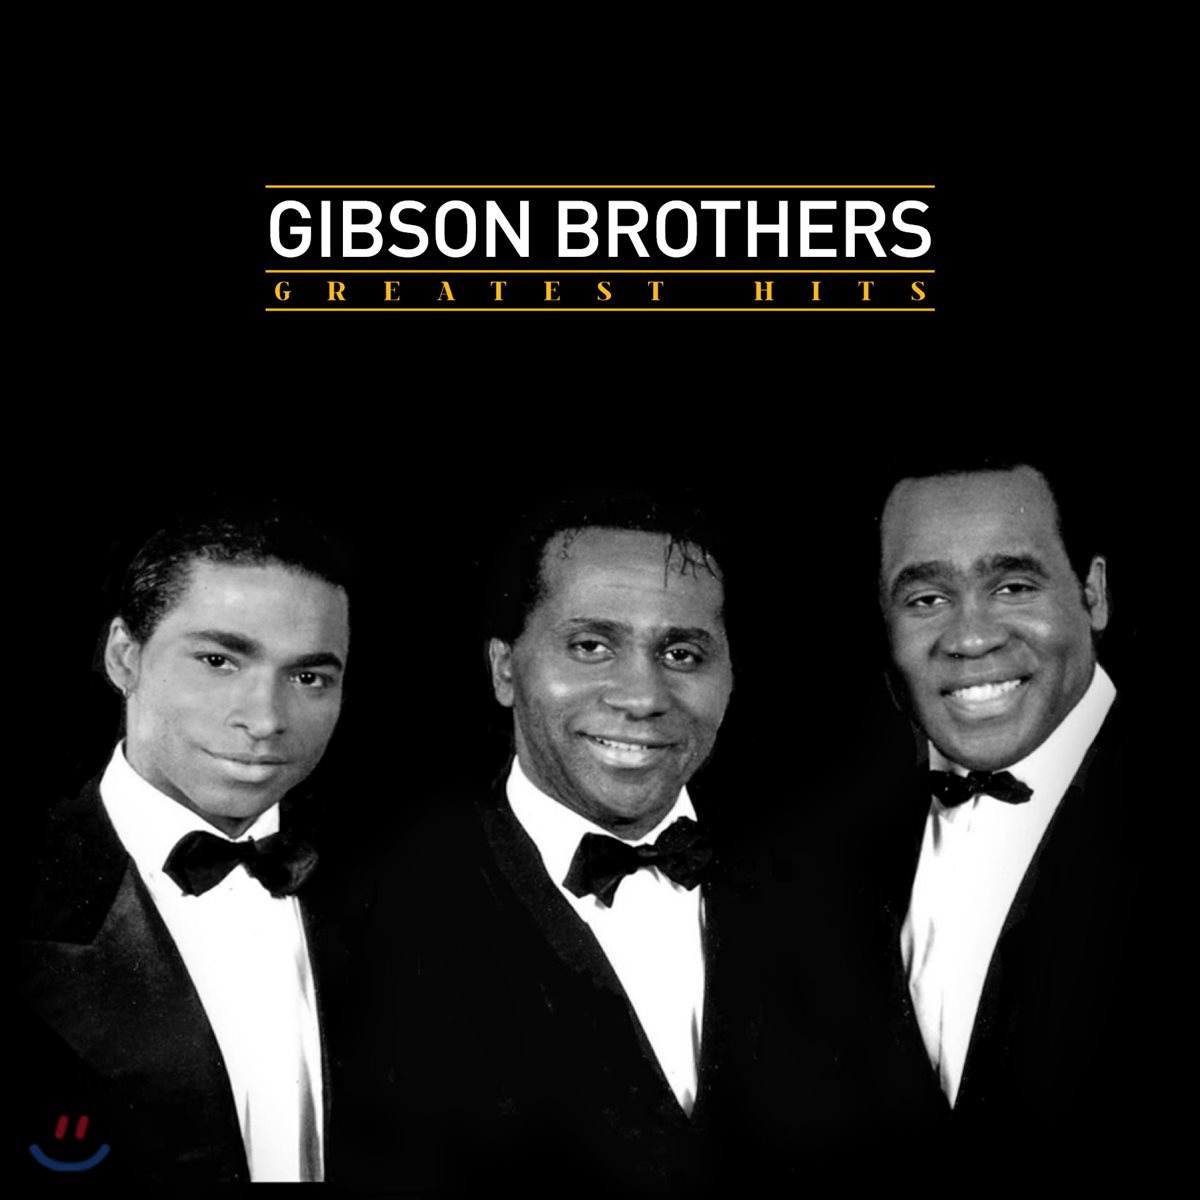 Gibson Brothers (깁슨 브라더스) - Greatest Hits 